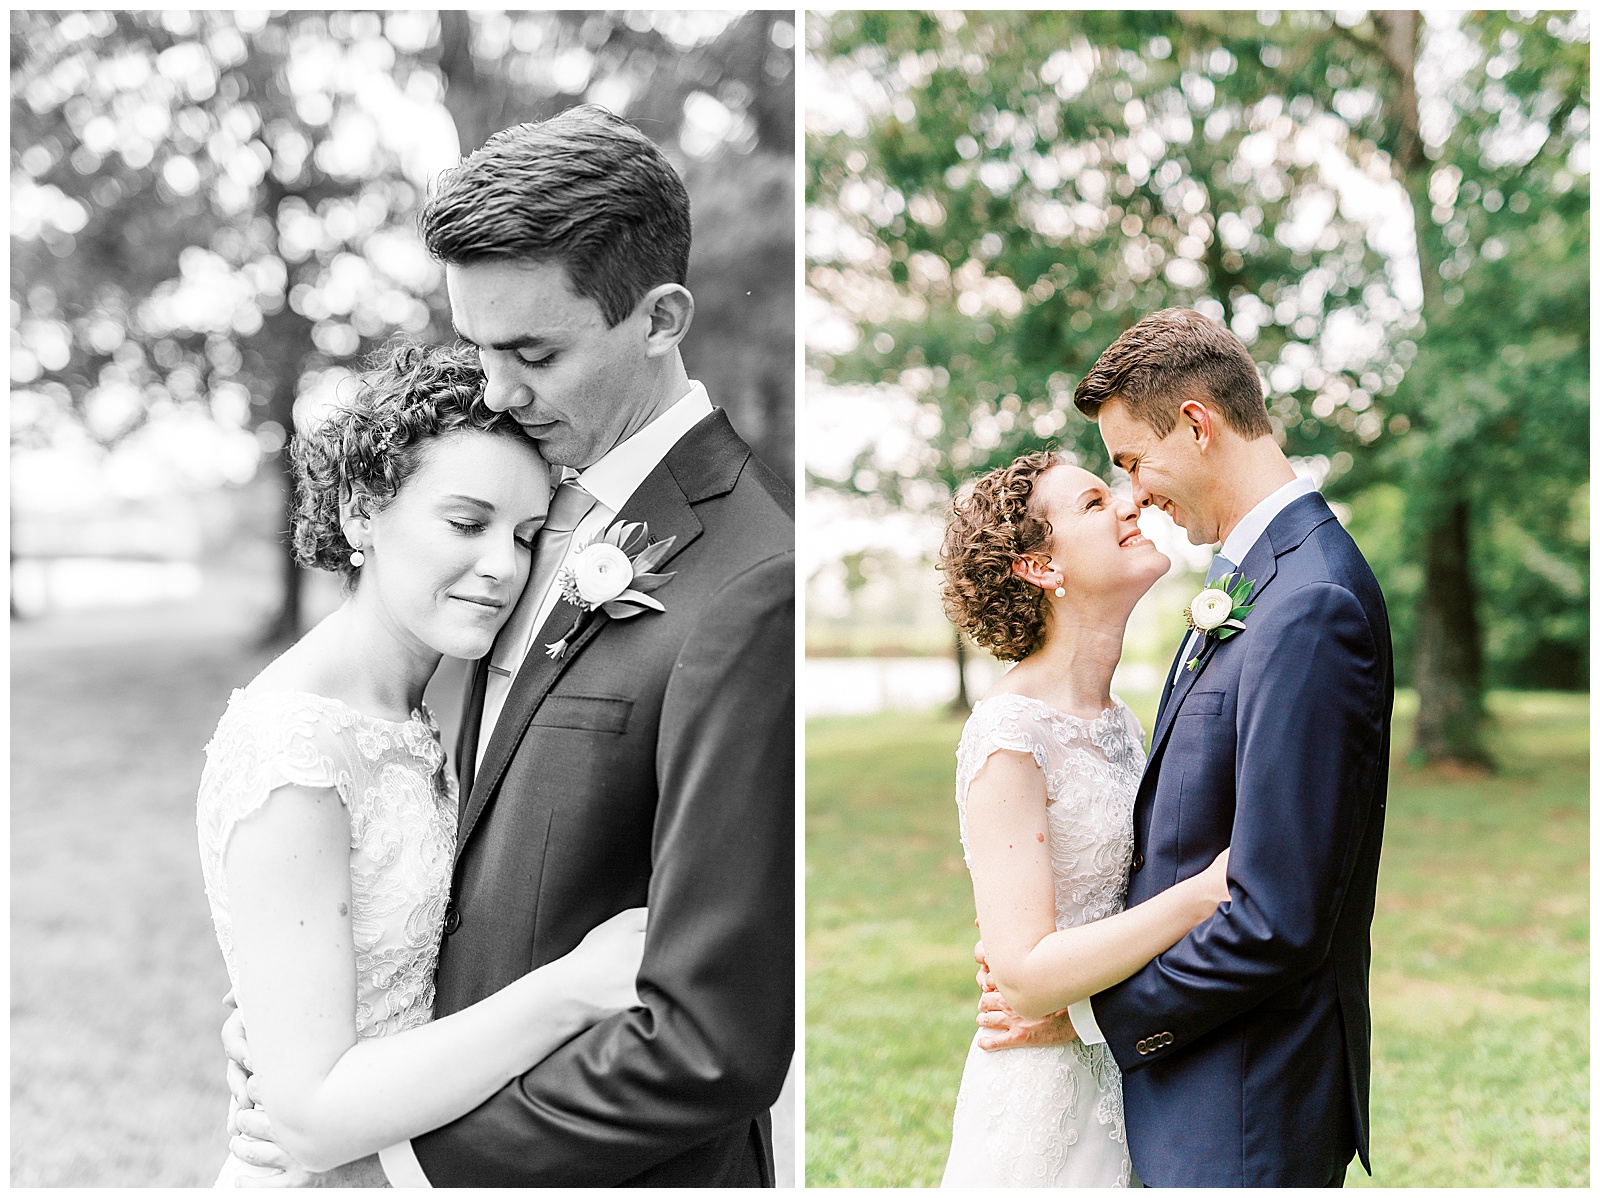 outside bride groom wedding day portraits curly short haired bride with lace wedding dress and navy blue suit groom